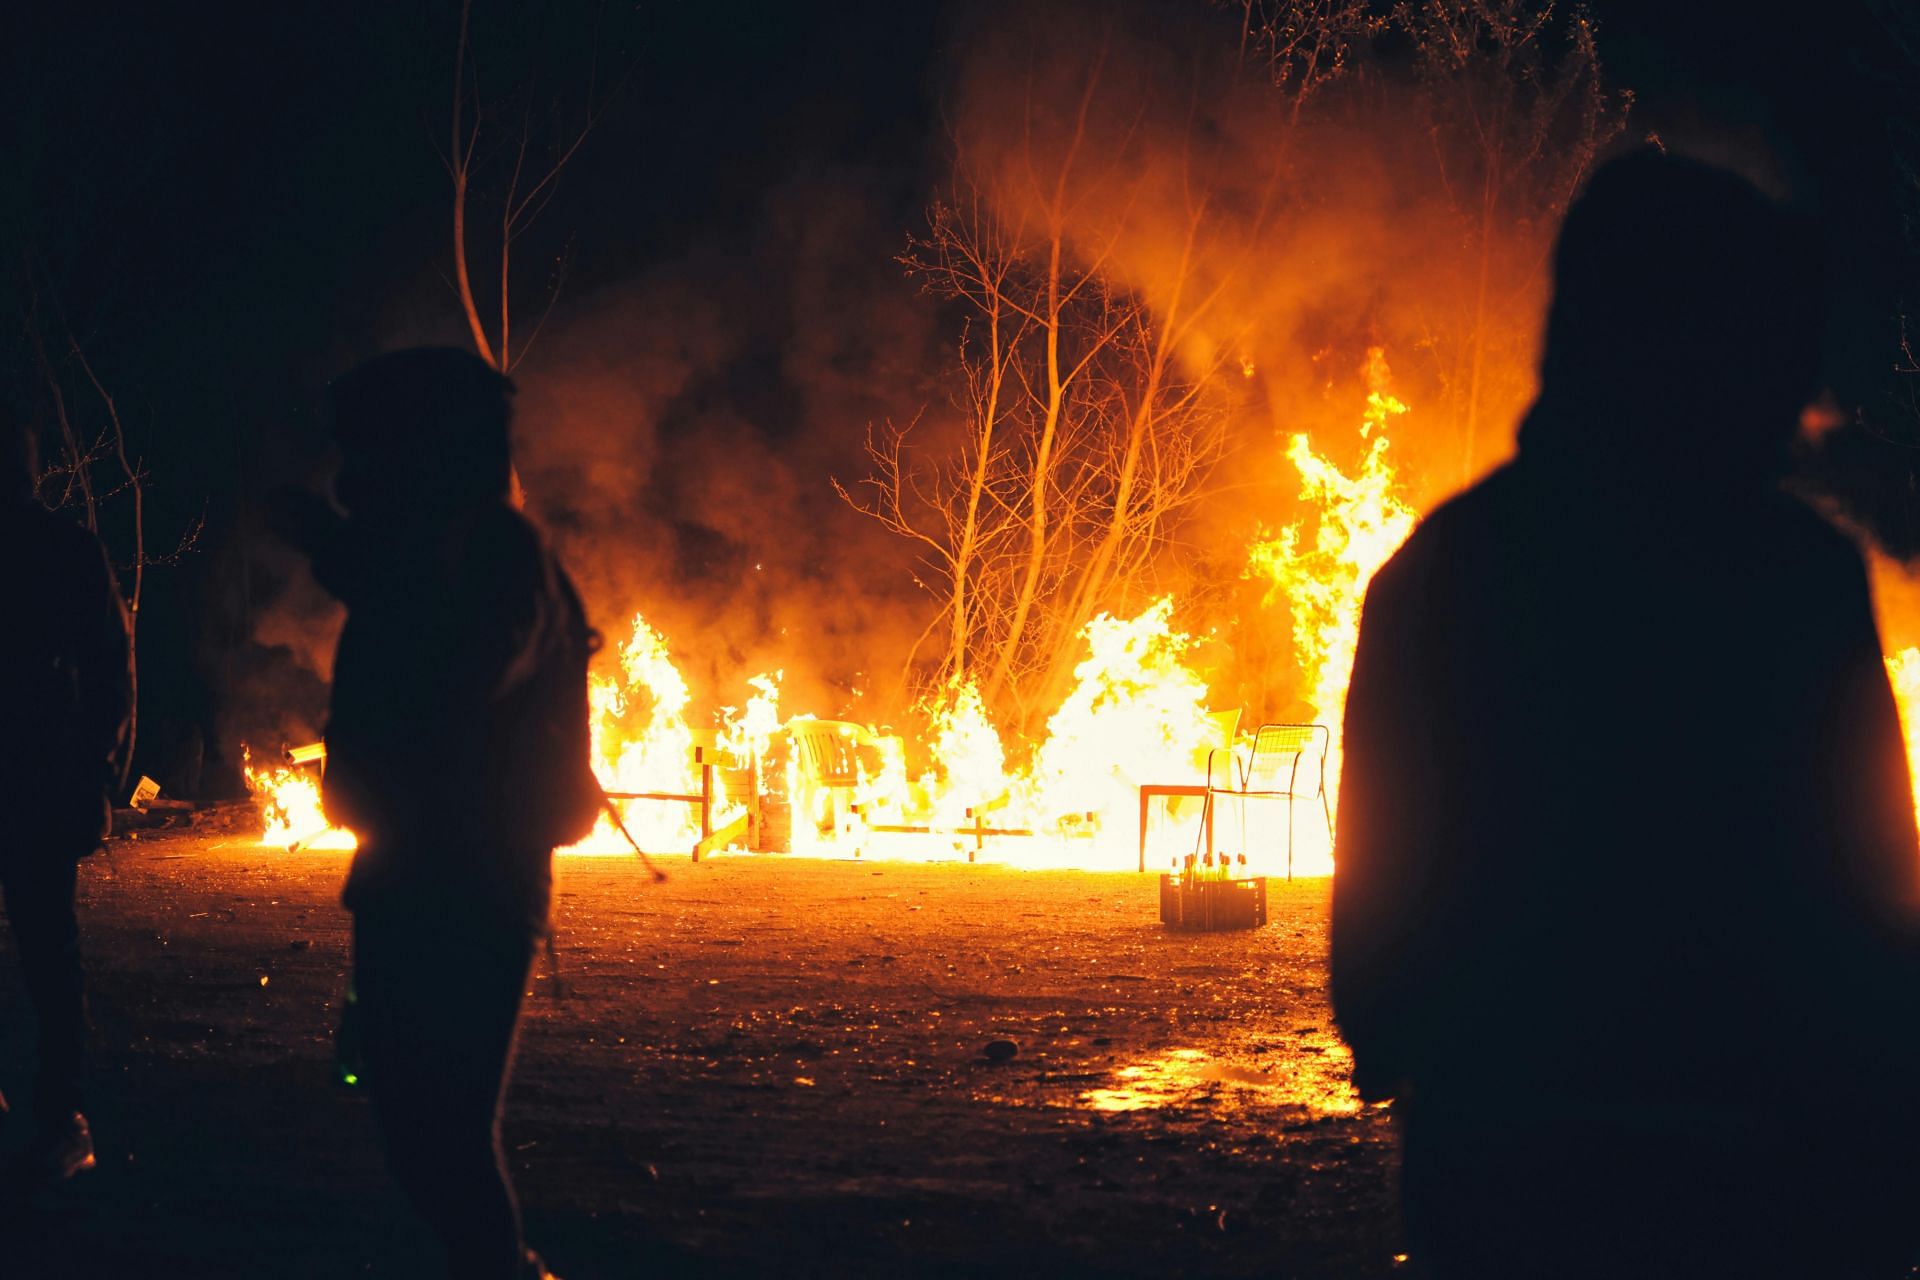 Gregory Scott Collins was killed and his house set on fire (Image via Pexels)